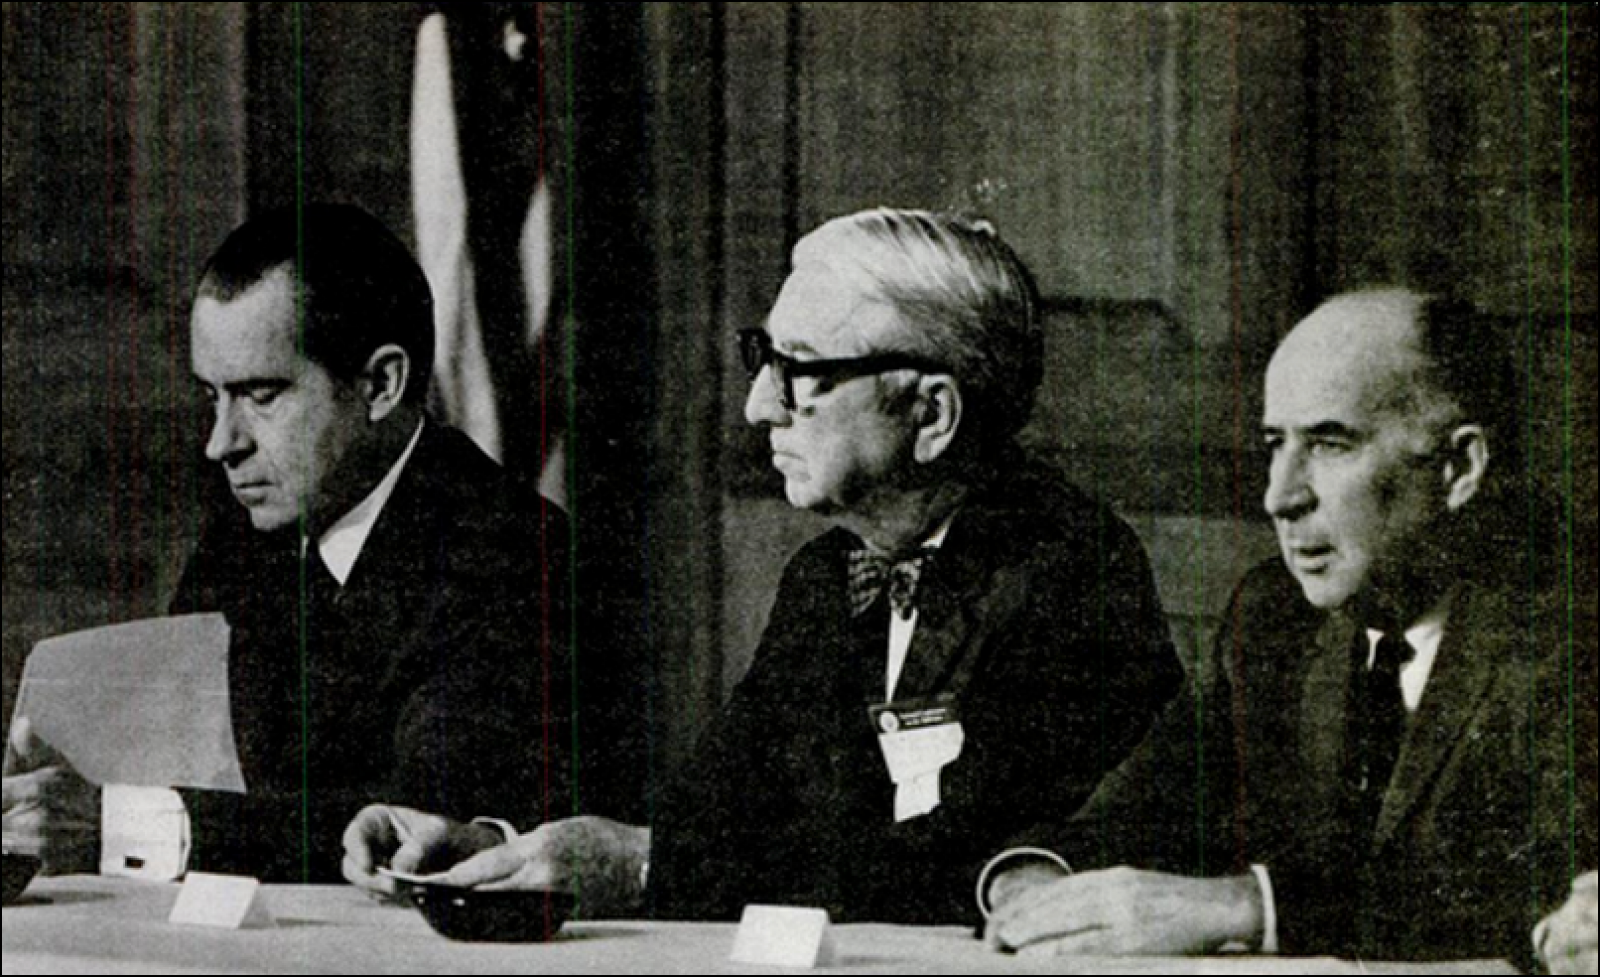 Photo of Nixon, Clark and Mitchell at conference banner image